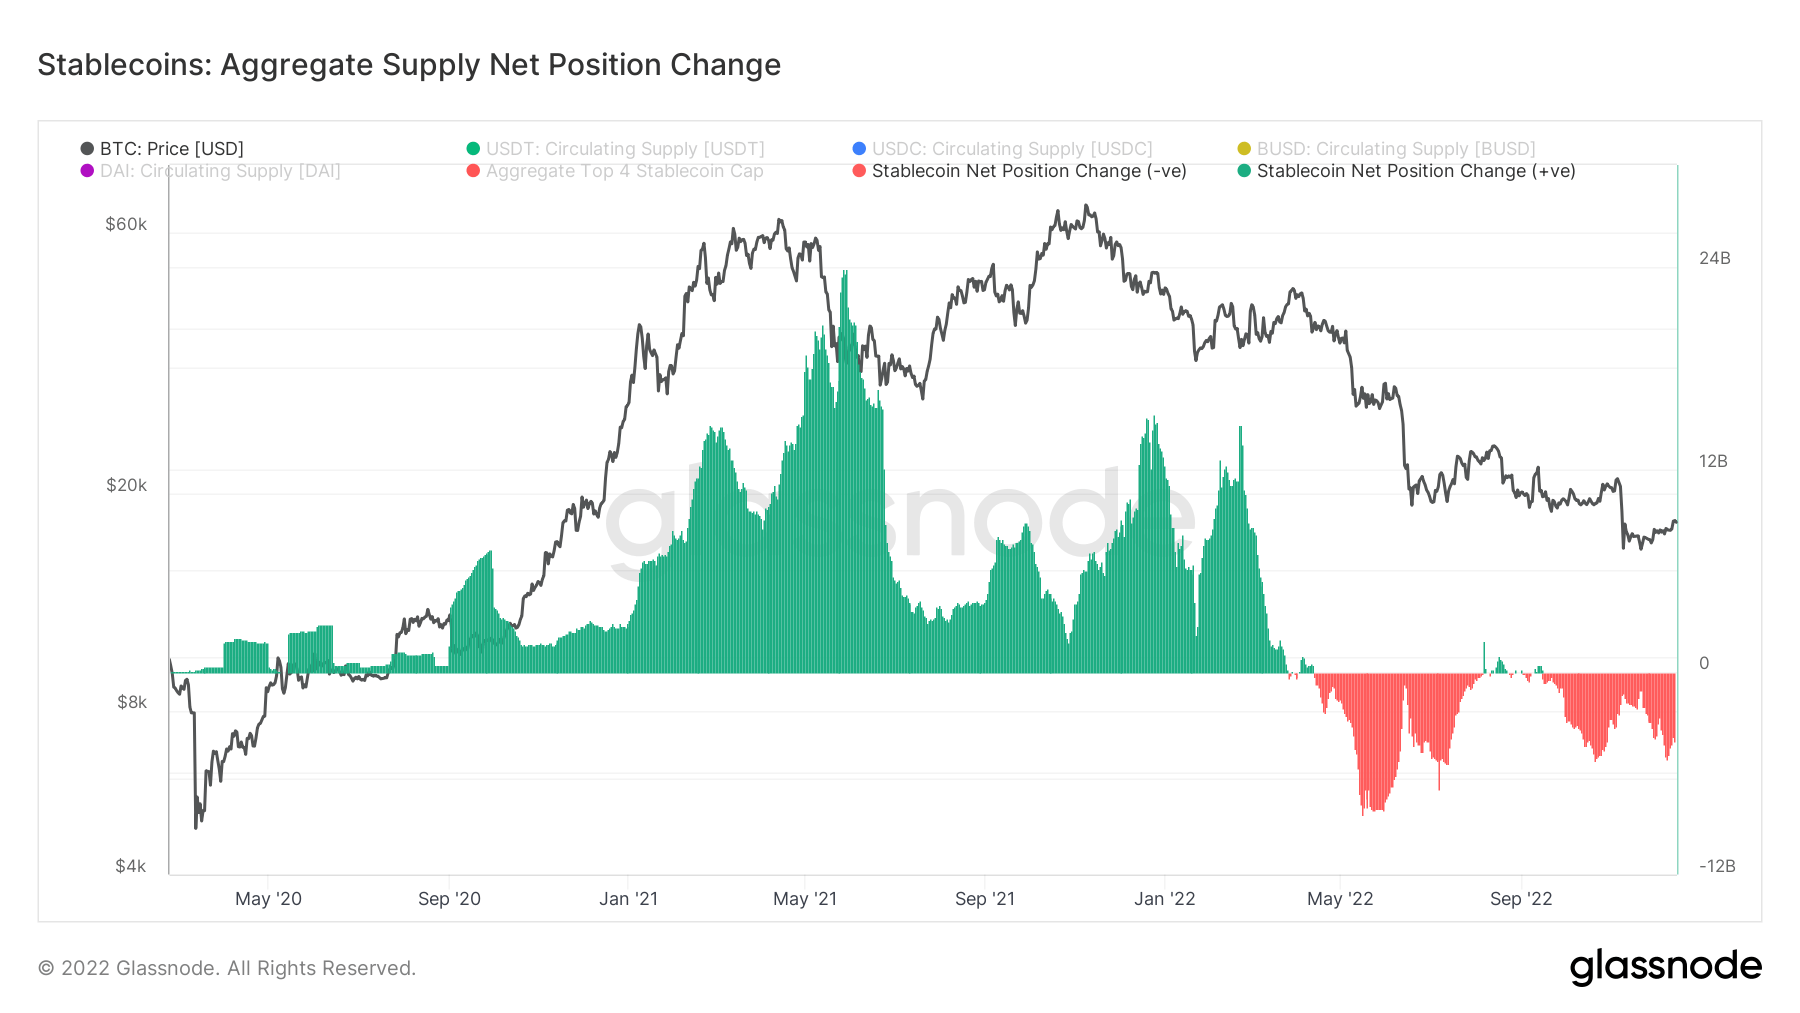 Stablecoins: Aggregate Supply Net Position Change